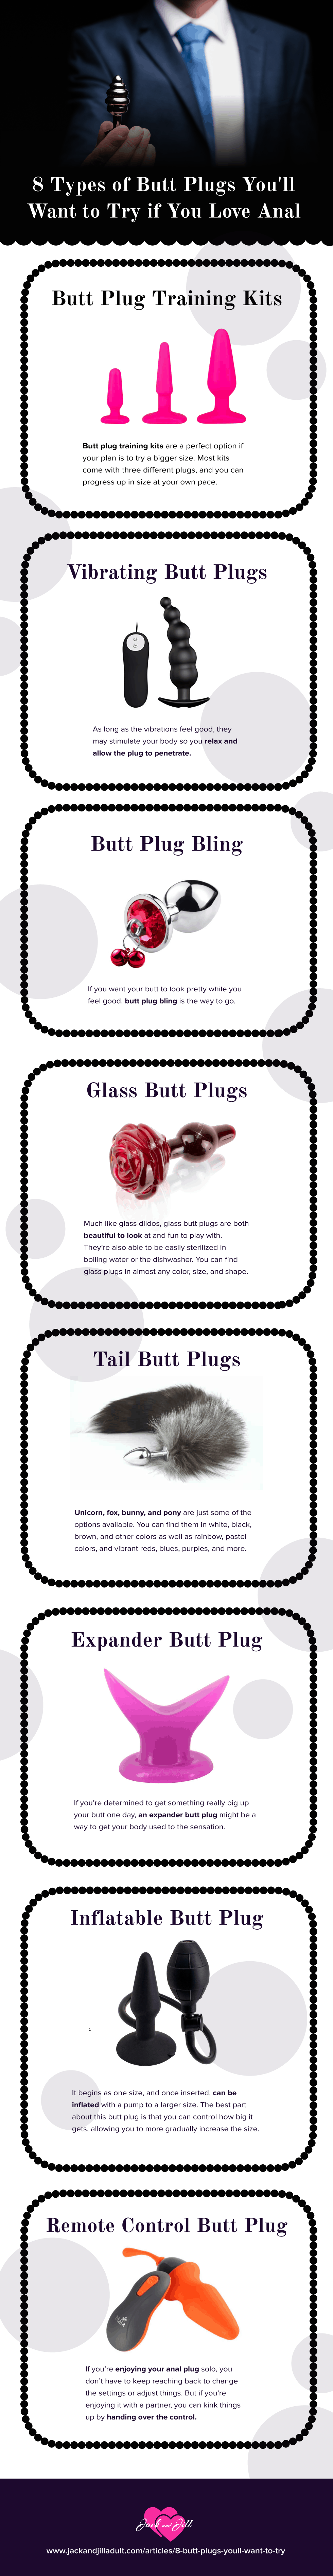 Infographic for 8 Butt Plugs You’ll Want to Try